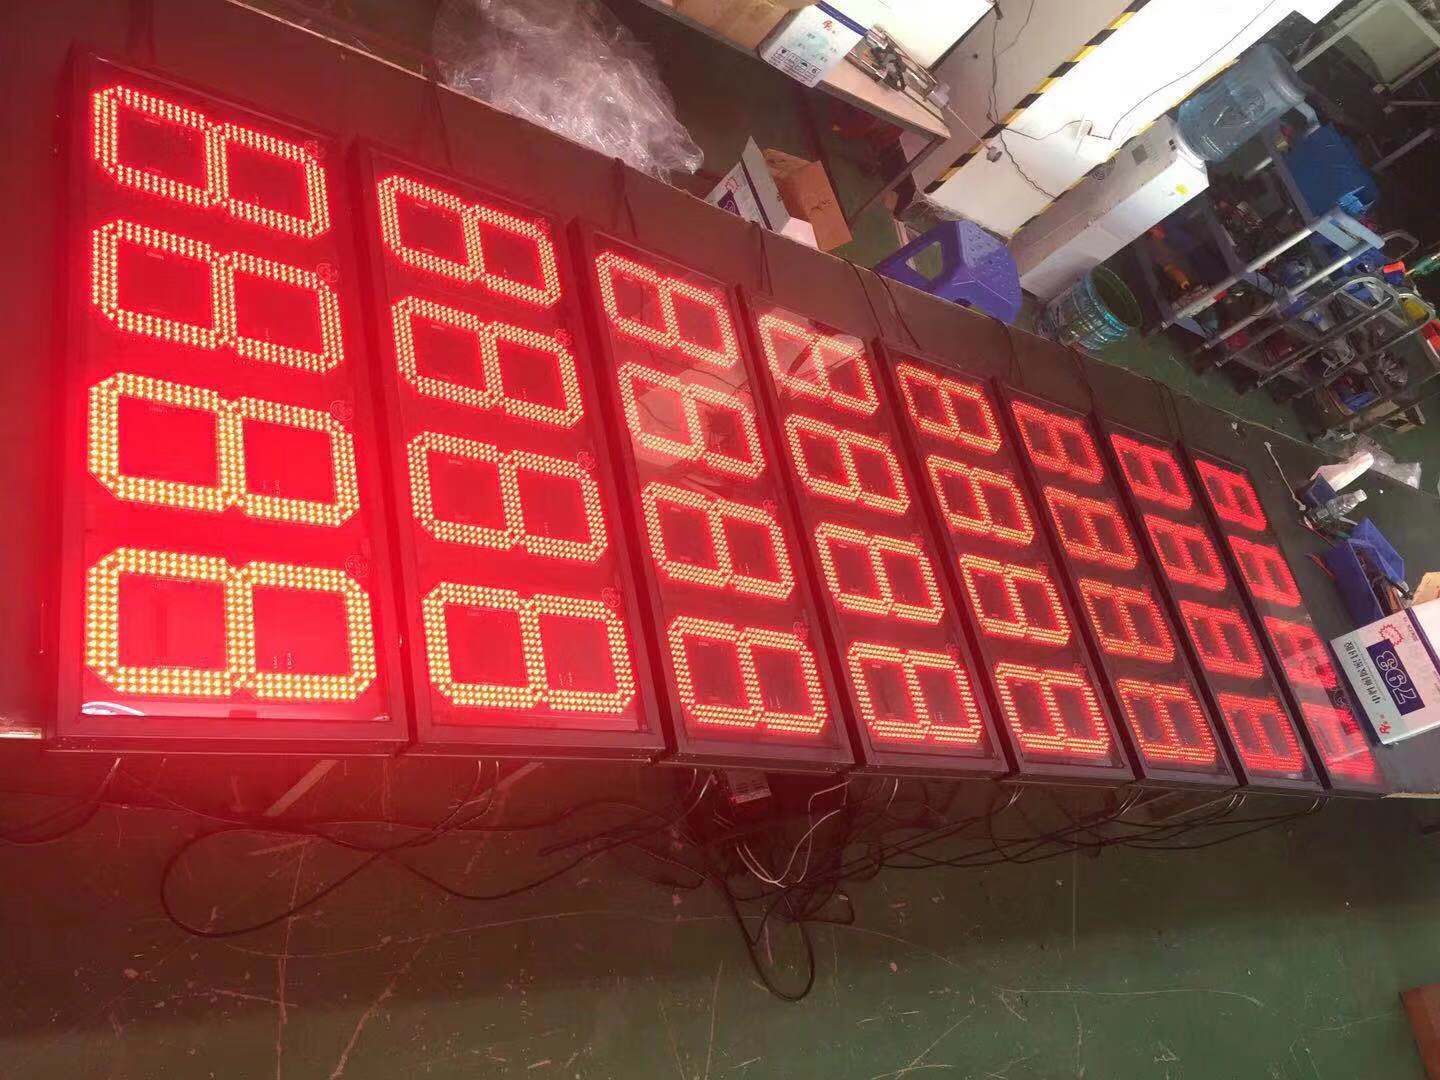 large digital wall clock for gym